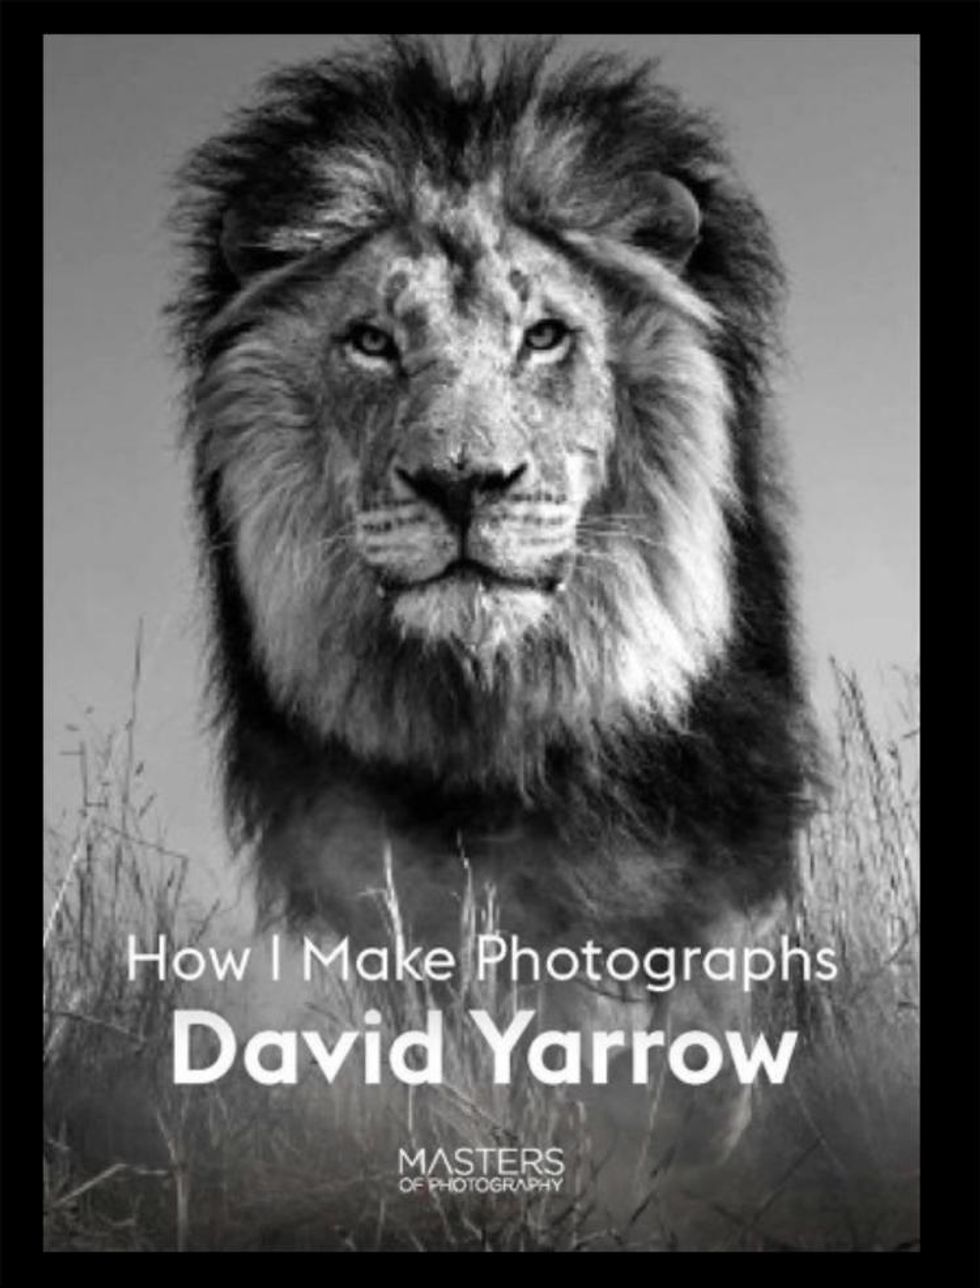 How I Make Photographs by David Yarrow book cover